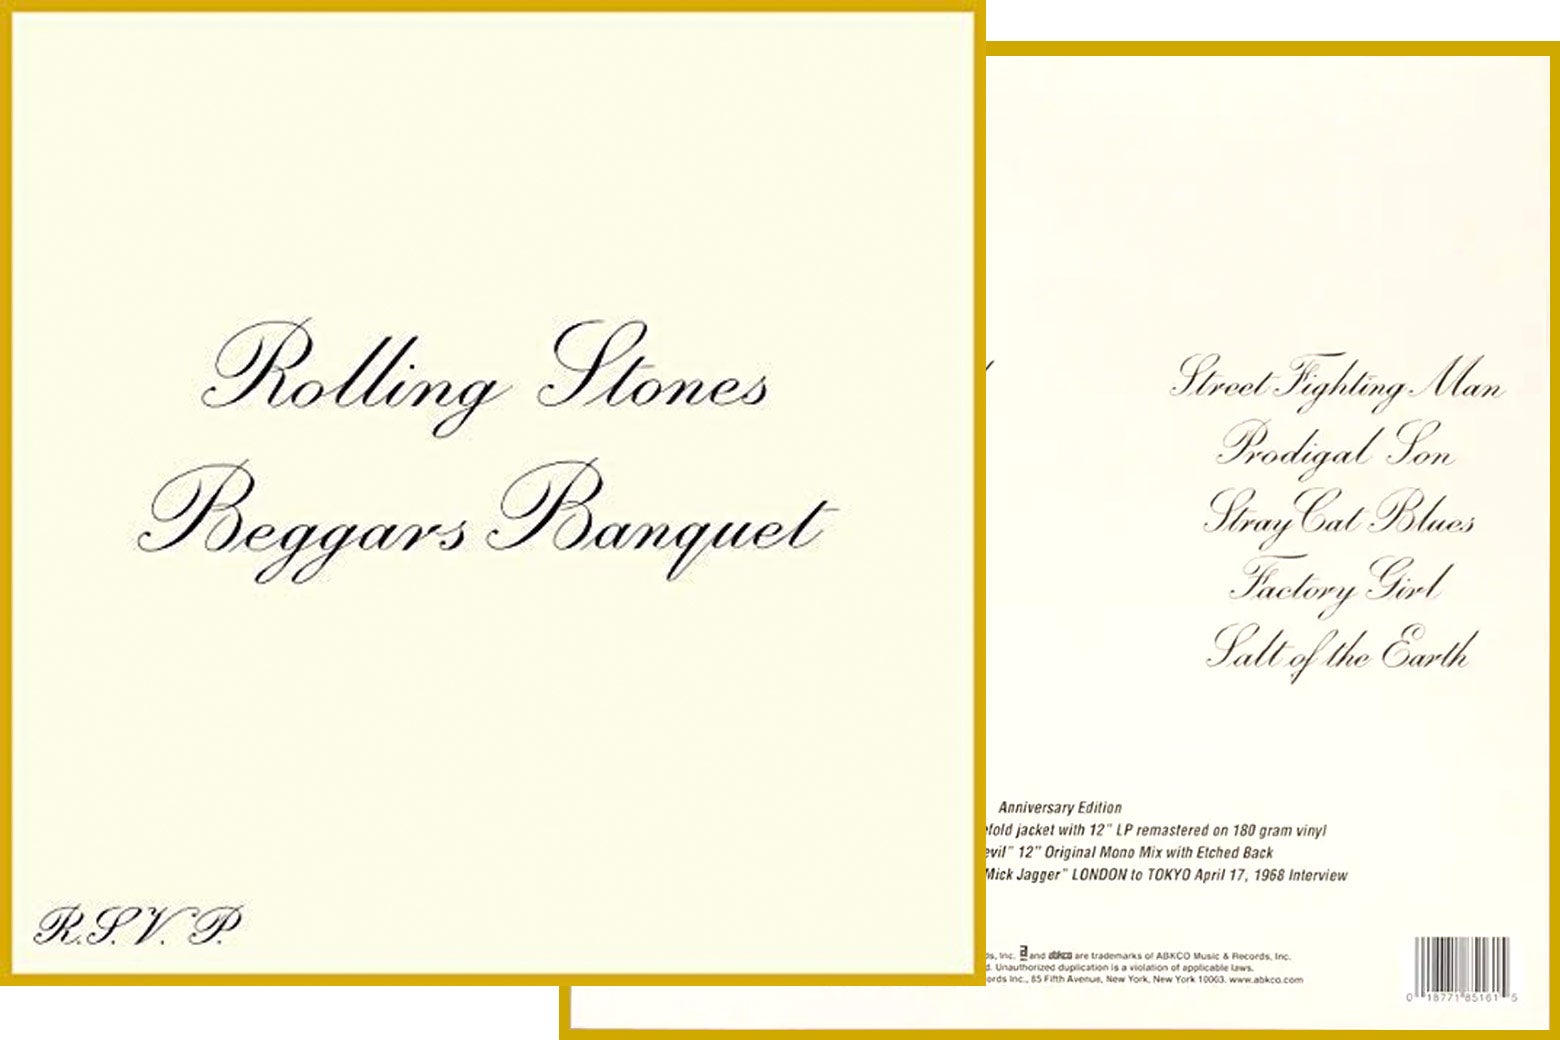 Front and back cover of the Beggars Banquet LP.